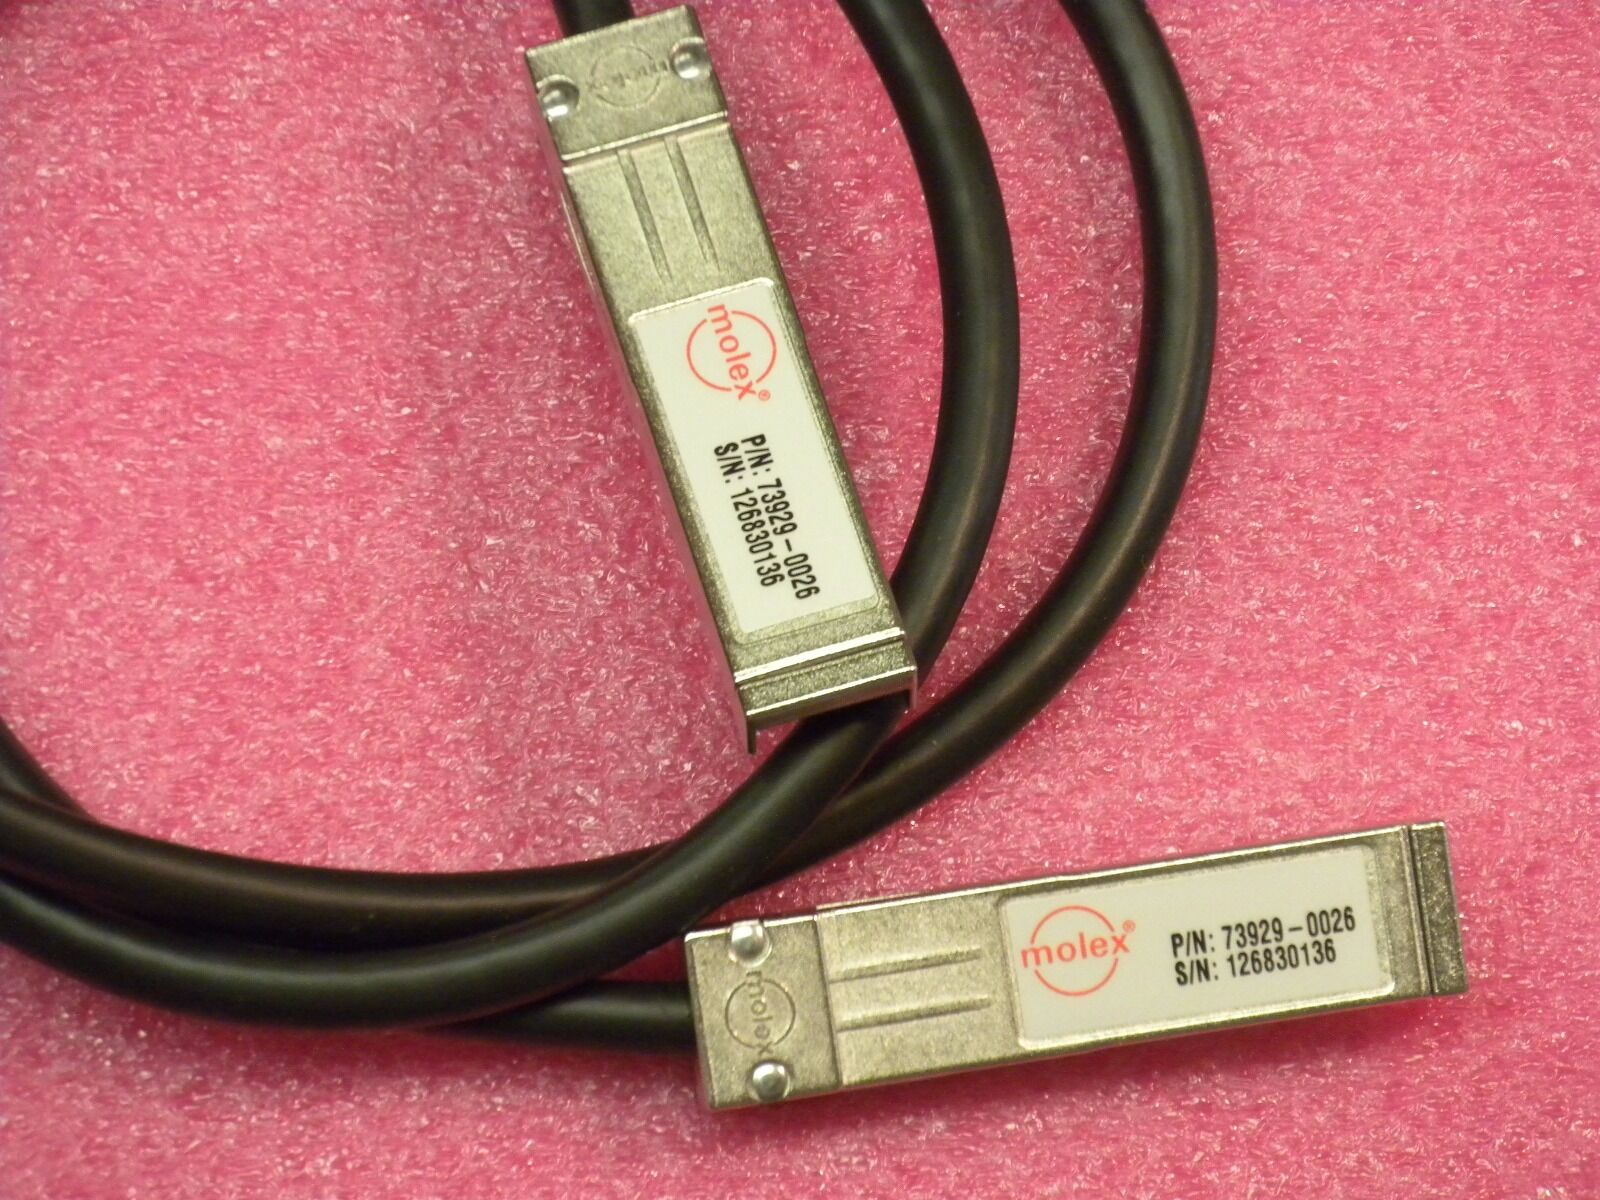 Brand New Molex 73929-0026 SFP Copper Patch Cable Passive 26 AWG New In Bag RoHS